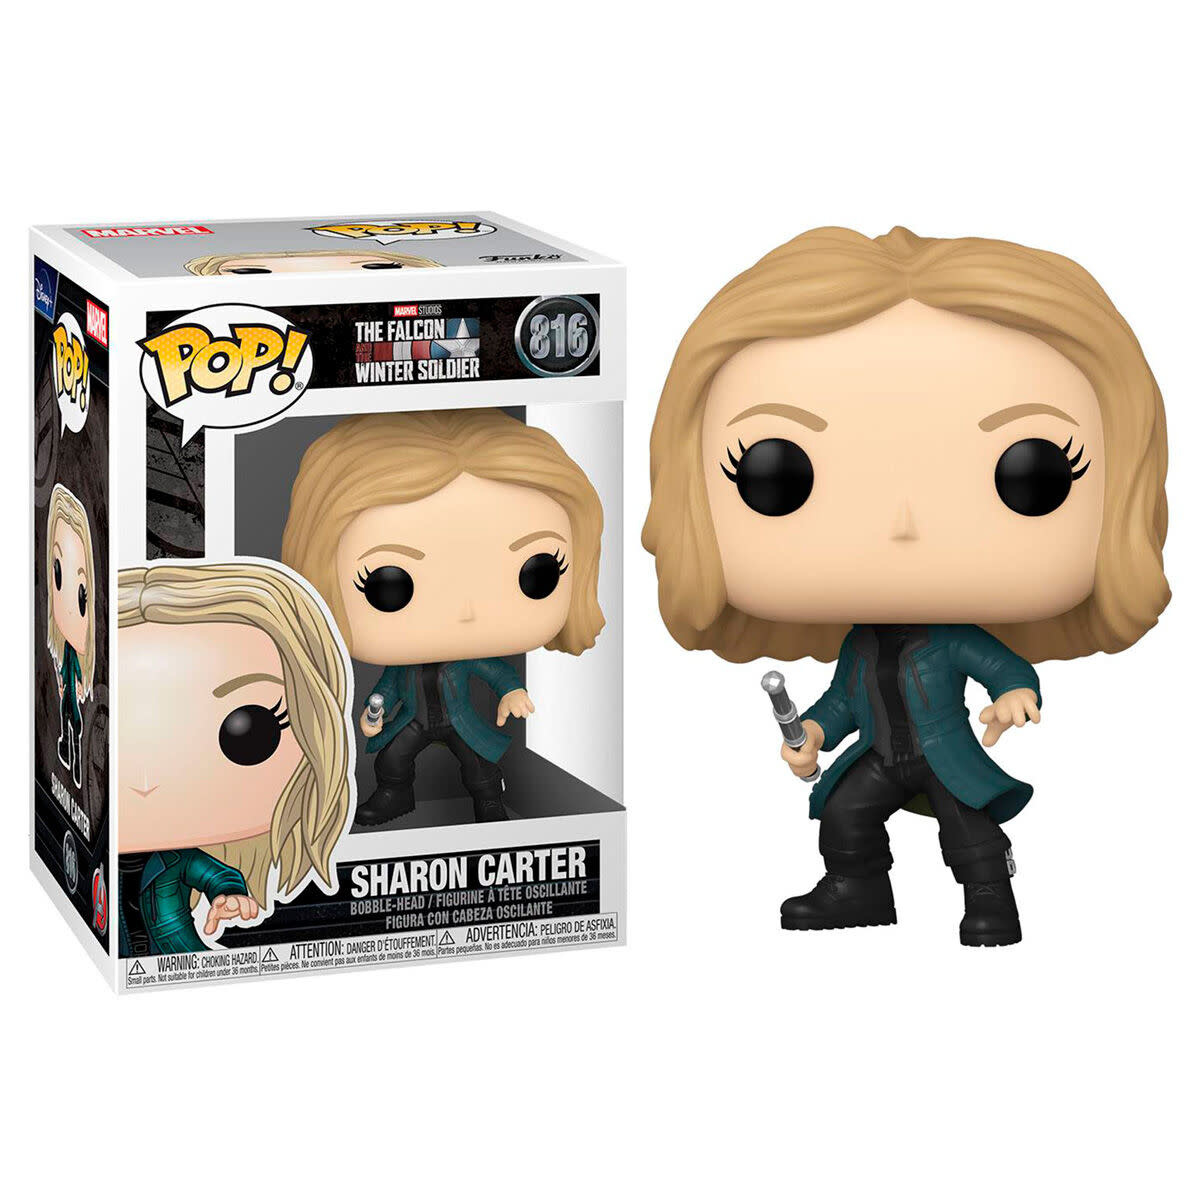 Funko Pop! The Falcon and the Winter Soldier 816 - Sharon Carter